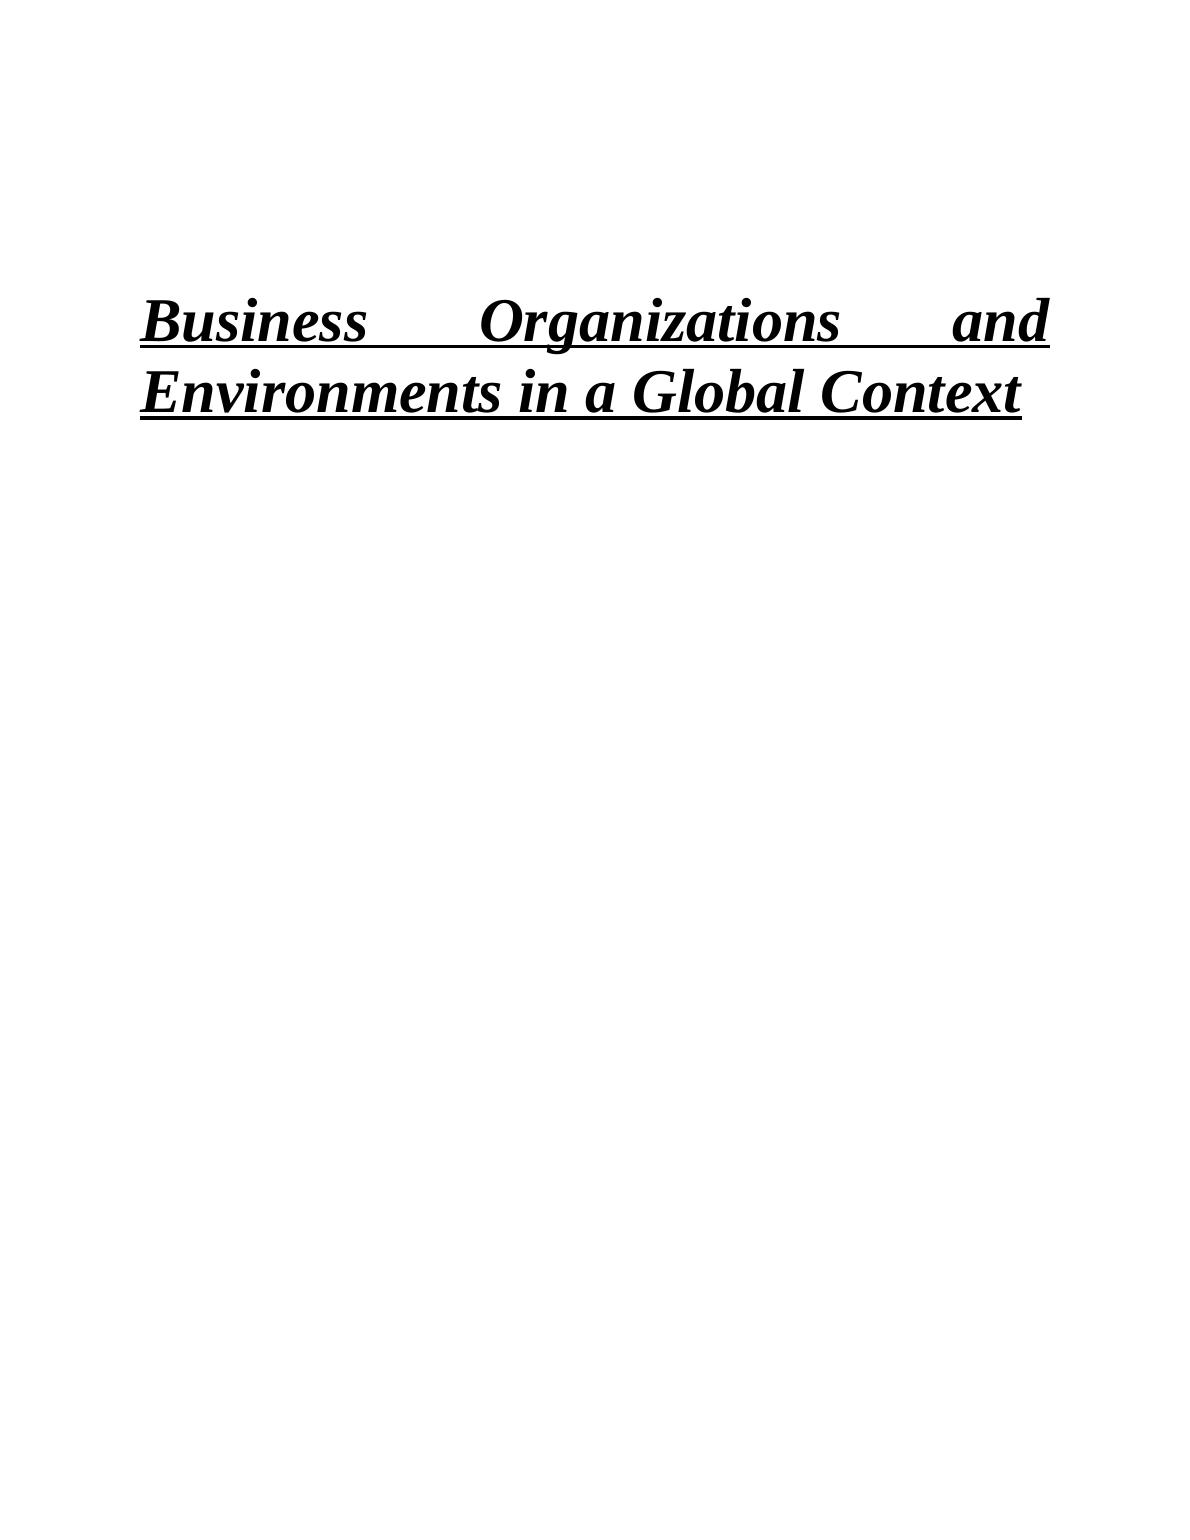 Business Organizations and Environments in a Global Context Assignment_1